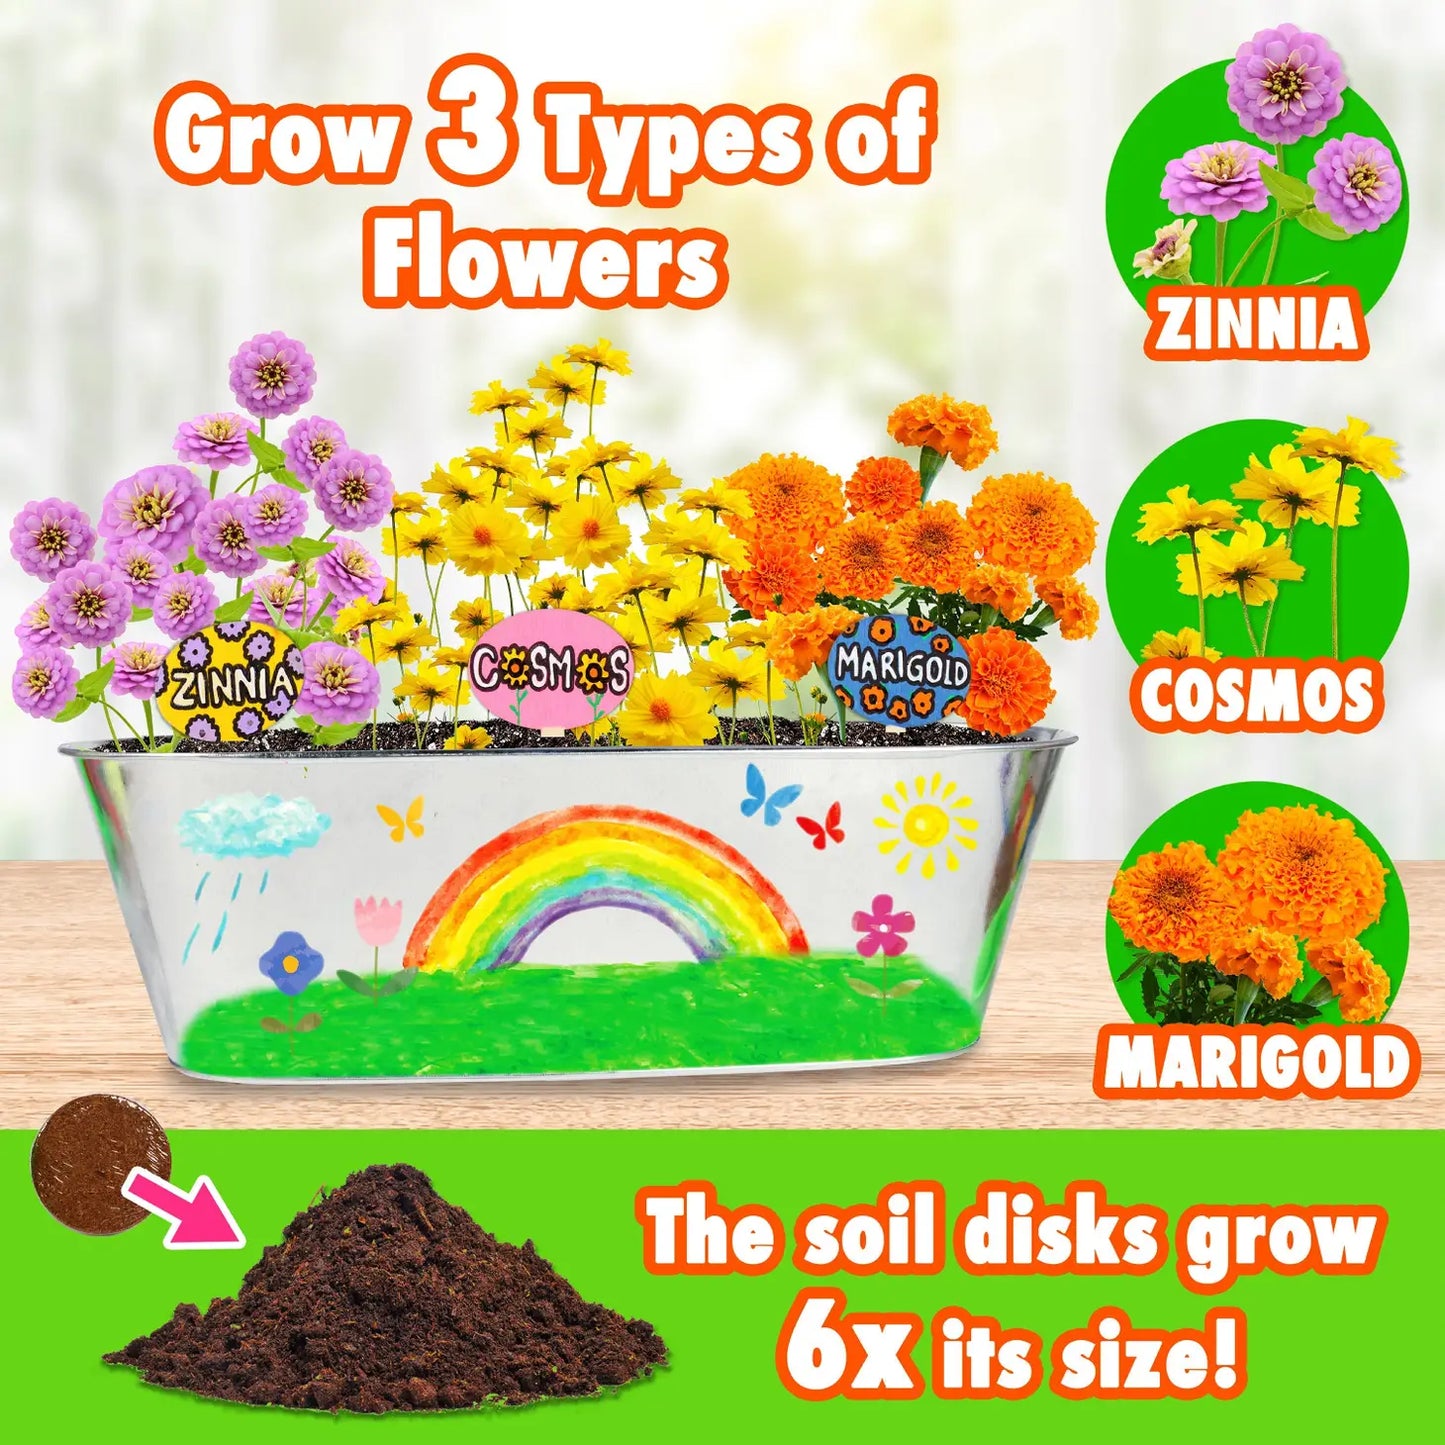 Miracle-Gro Paint & Plant- My First Flower Growing Kit